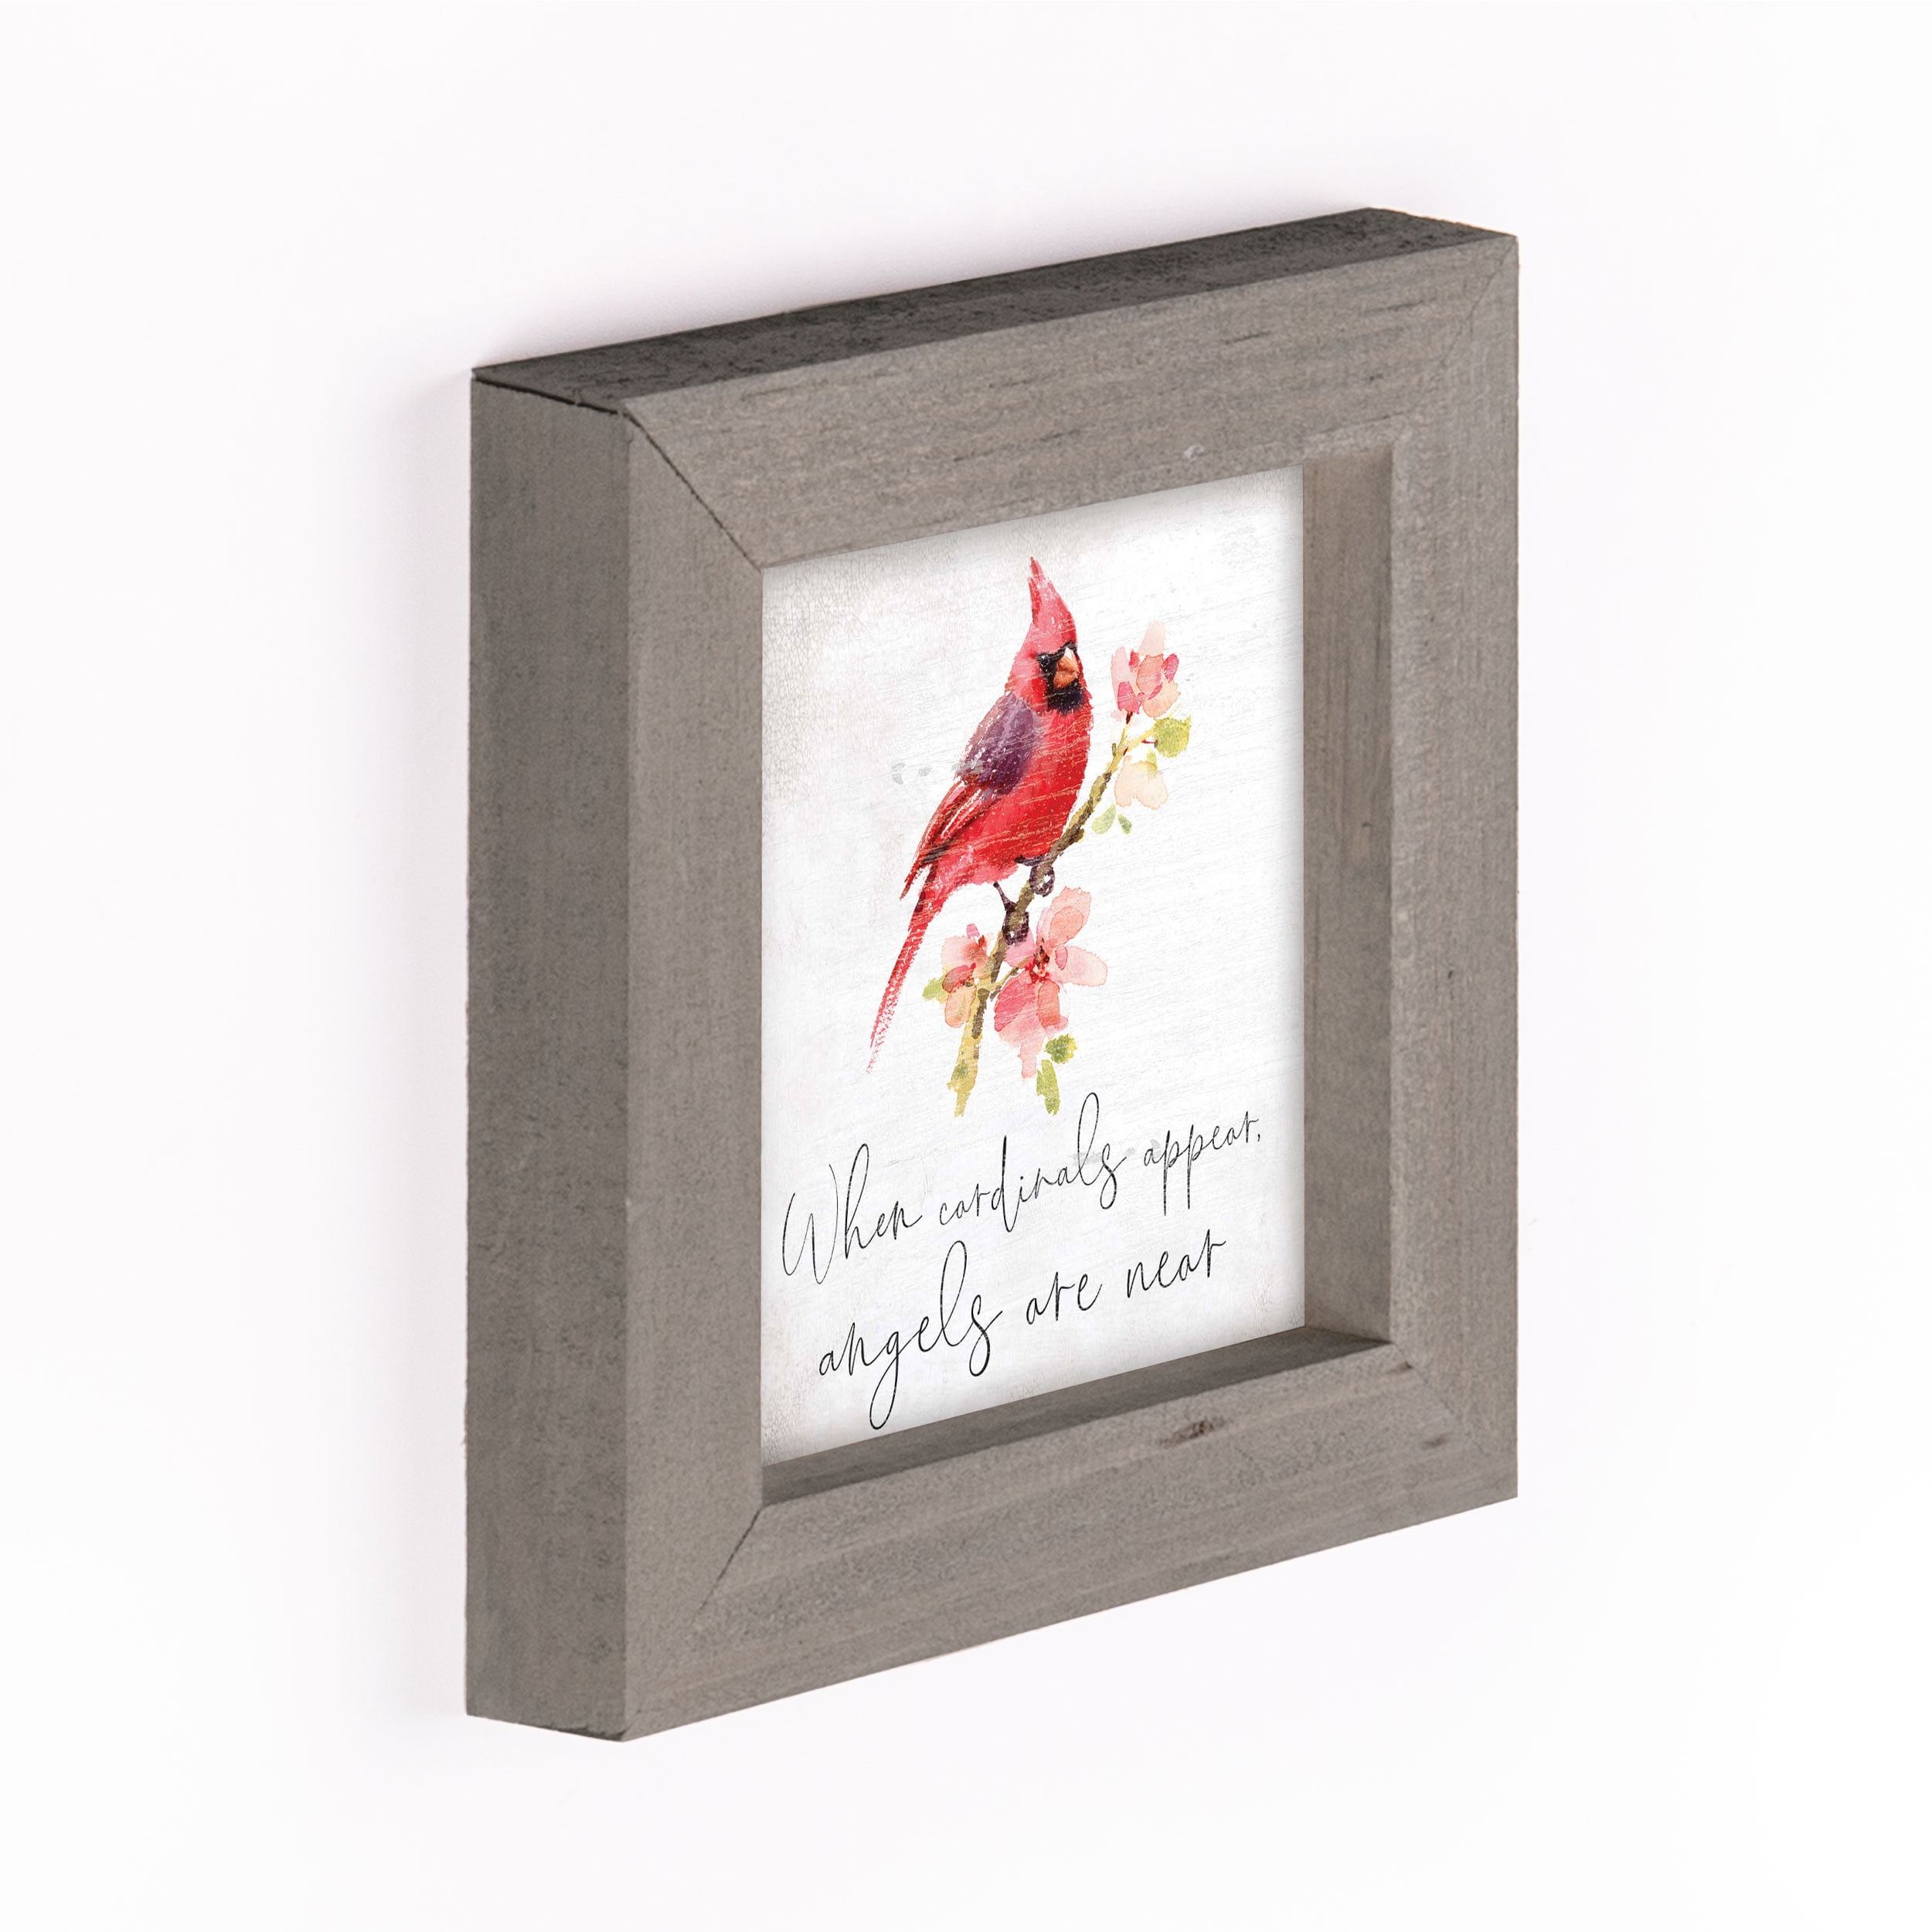 Cardinals Angels Are Near Floral Red 5 x 5 Pine Wood Driftwood Framed Art Sign 